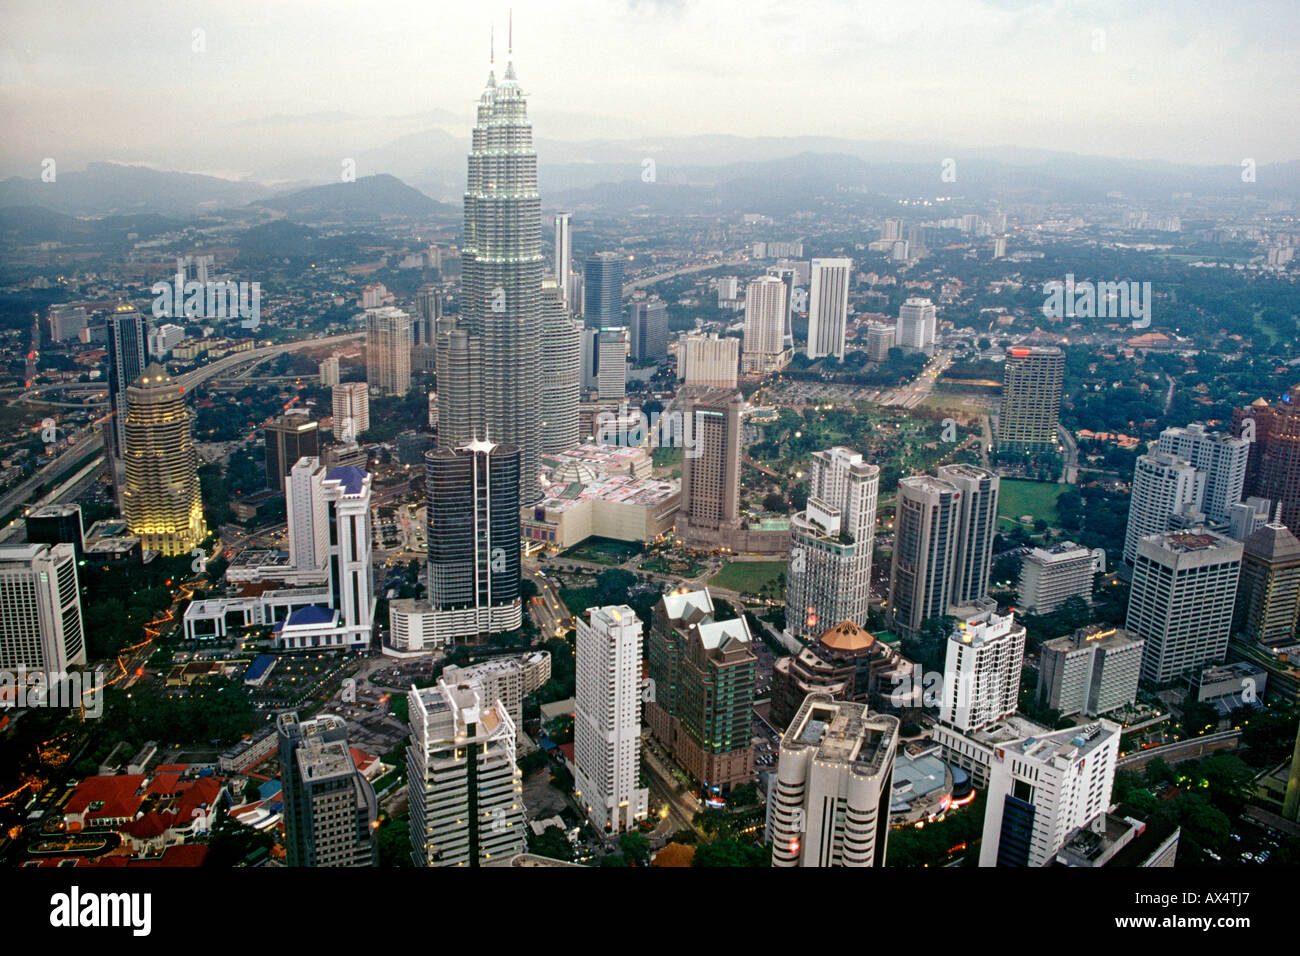 The view of the Petronas Twin Towers and downtown KL from the viewing deck of the KL Tower in Kuala Lumpur Malaysia. Stock Photo